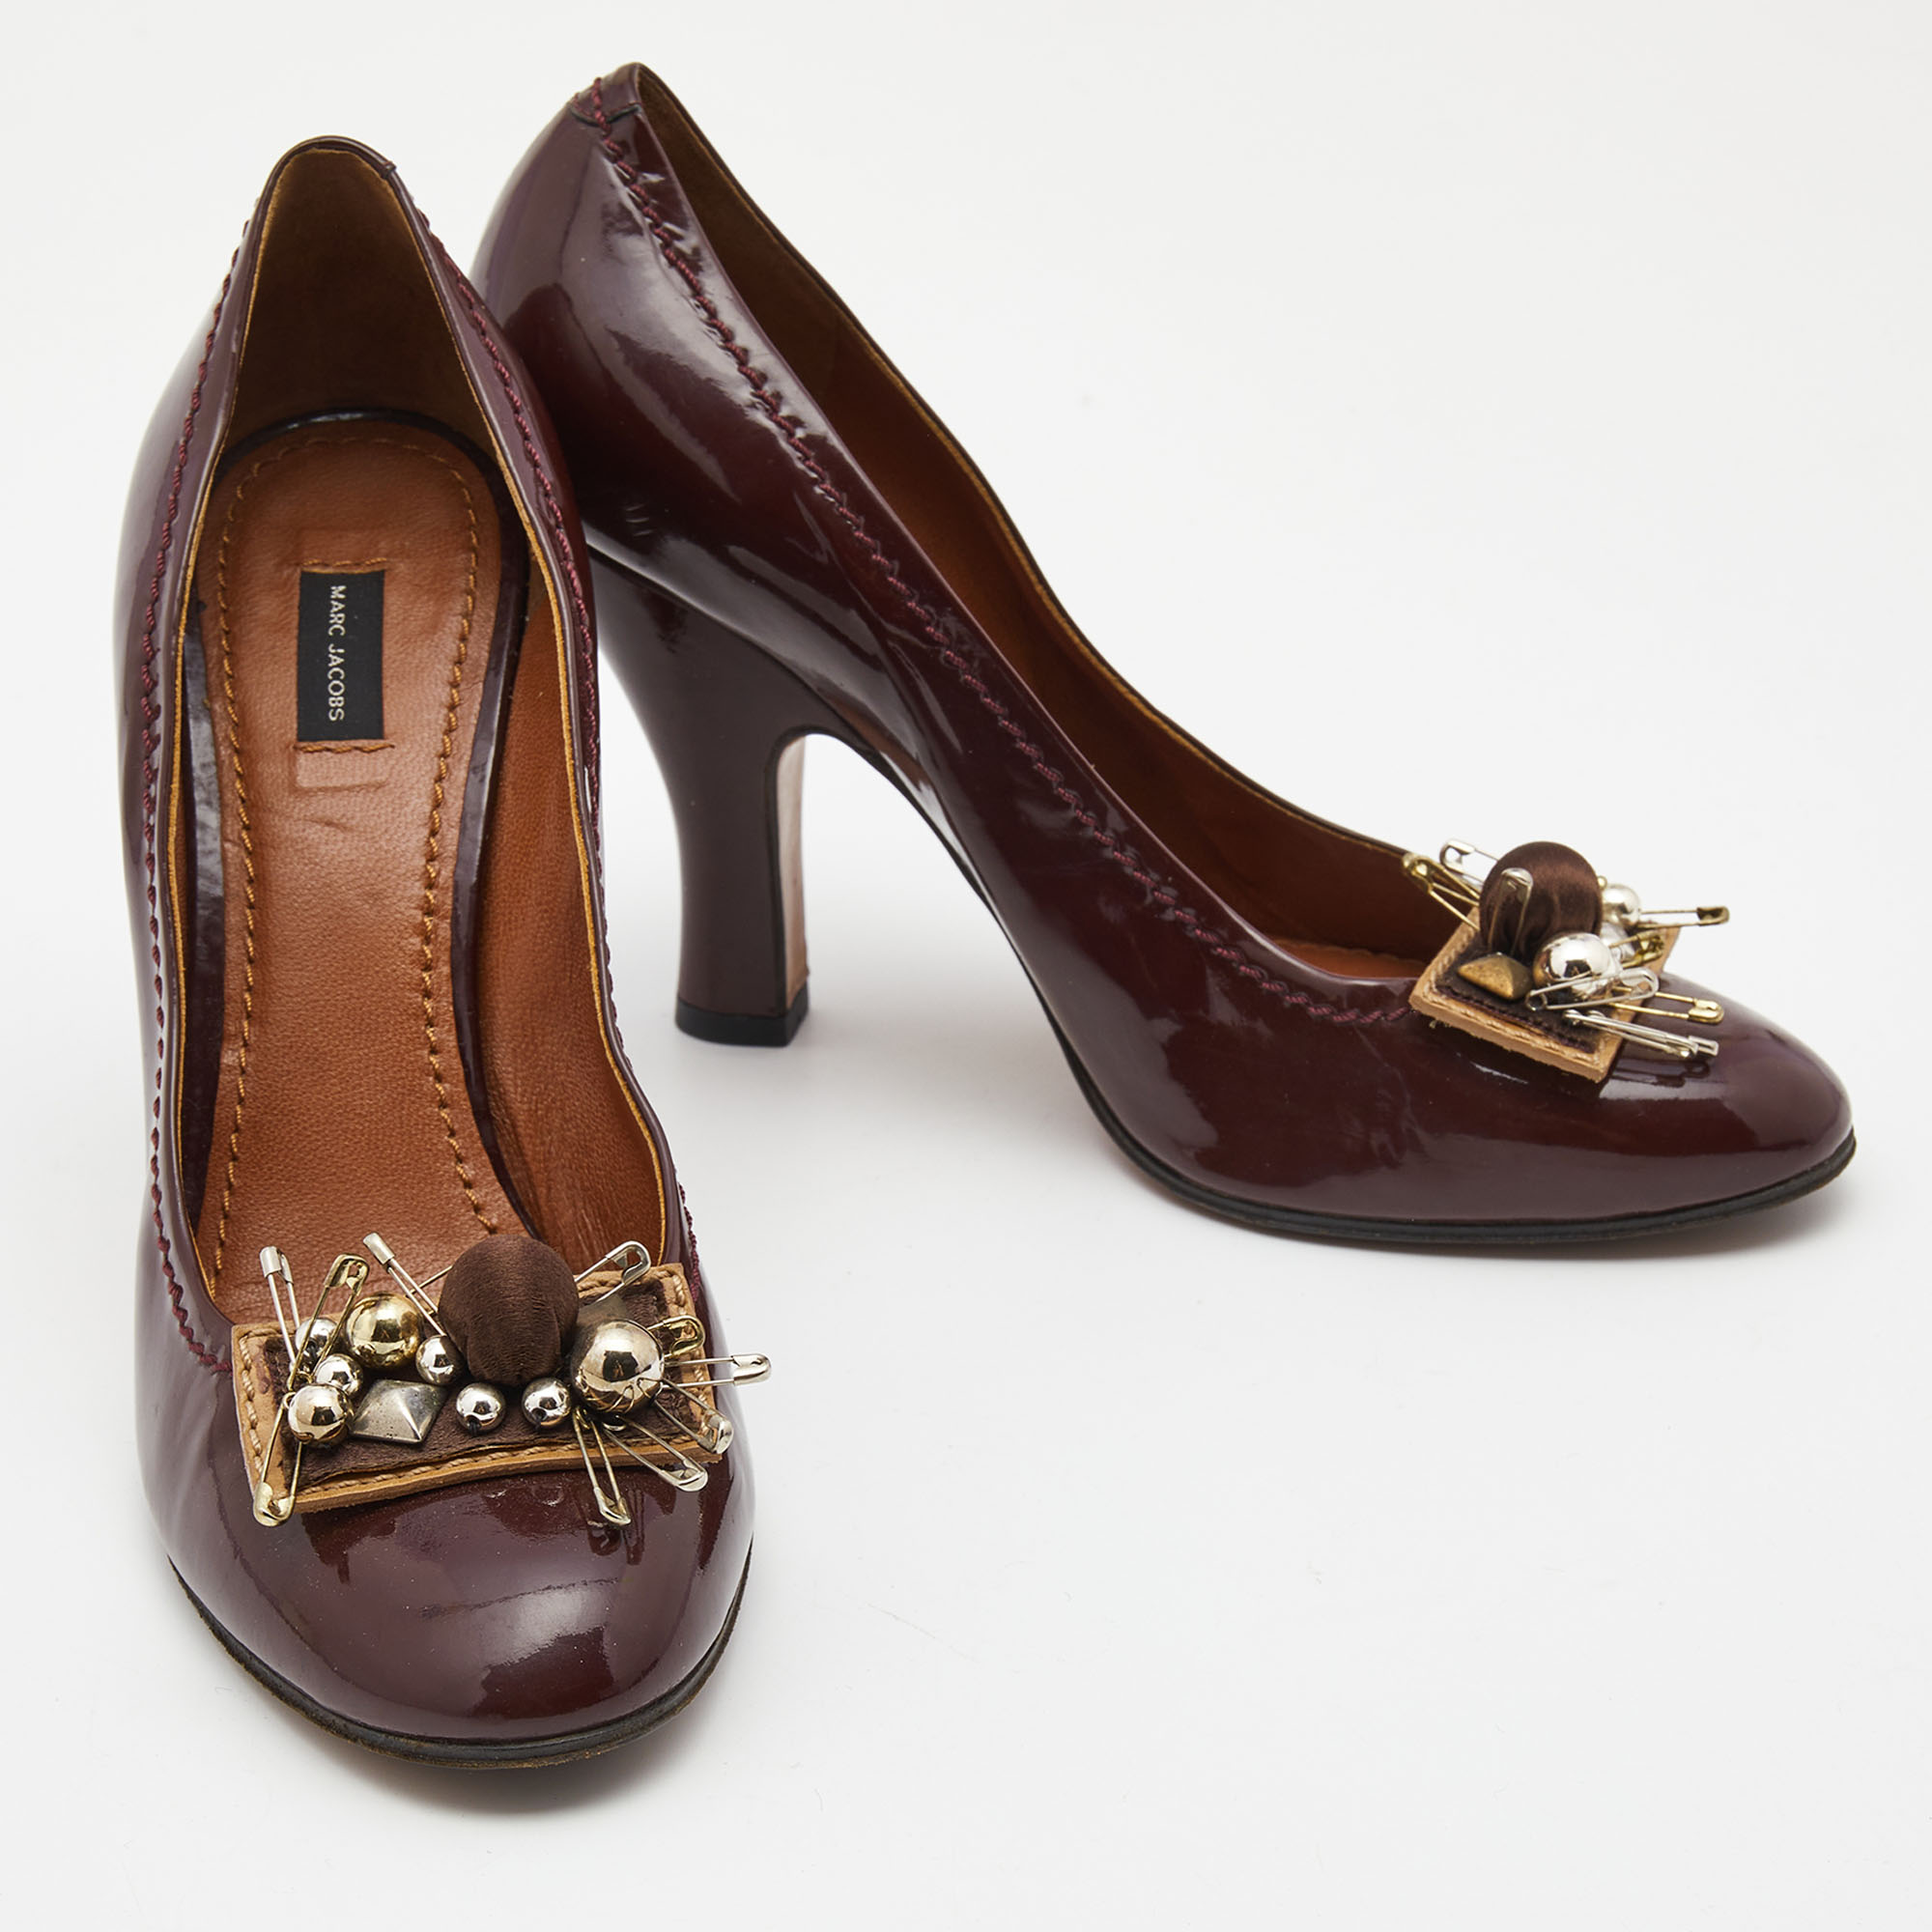 Marc Jacobs Burgundy Patent Leather Embellished Pumps Size 37.5